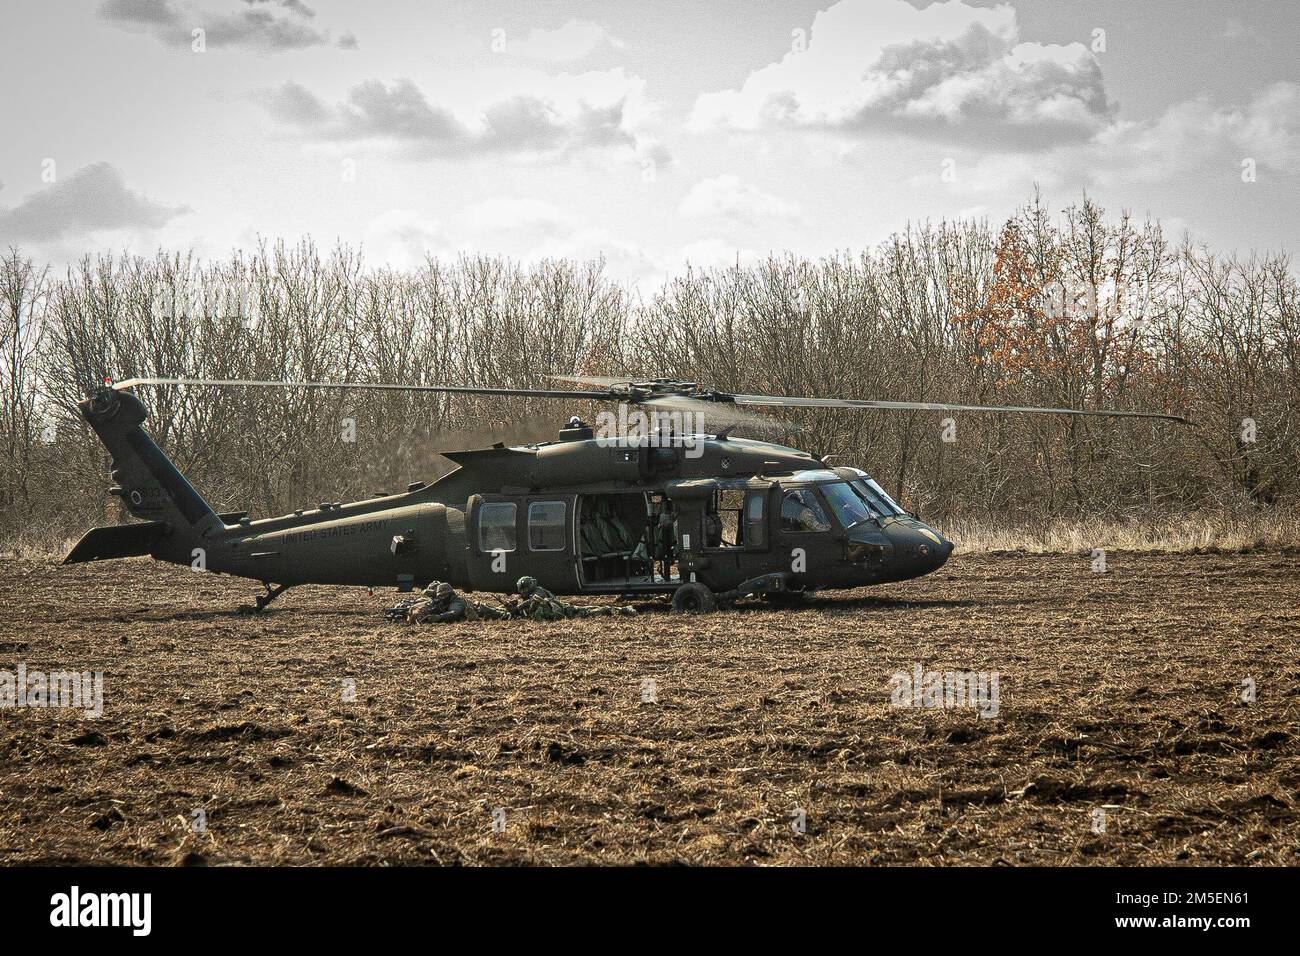 MIHAIL KOGALNICEANU AIR BASE, Romania – Soldiers with the Royal Netherlands 13th Air Assault Battalion,11th Air Assault Brigade exit a 1st Air Cavalry Brigade UH60 Blackhawk during Rapid Falcon, Babadag Training Area, Romania, March 8, 2022.     Rapid Falcon is designed as a joint multinational exercise to increase operability and joint reaction capacity as well as the development of functional relationships between participating structures. Stock Photo